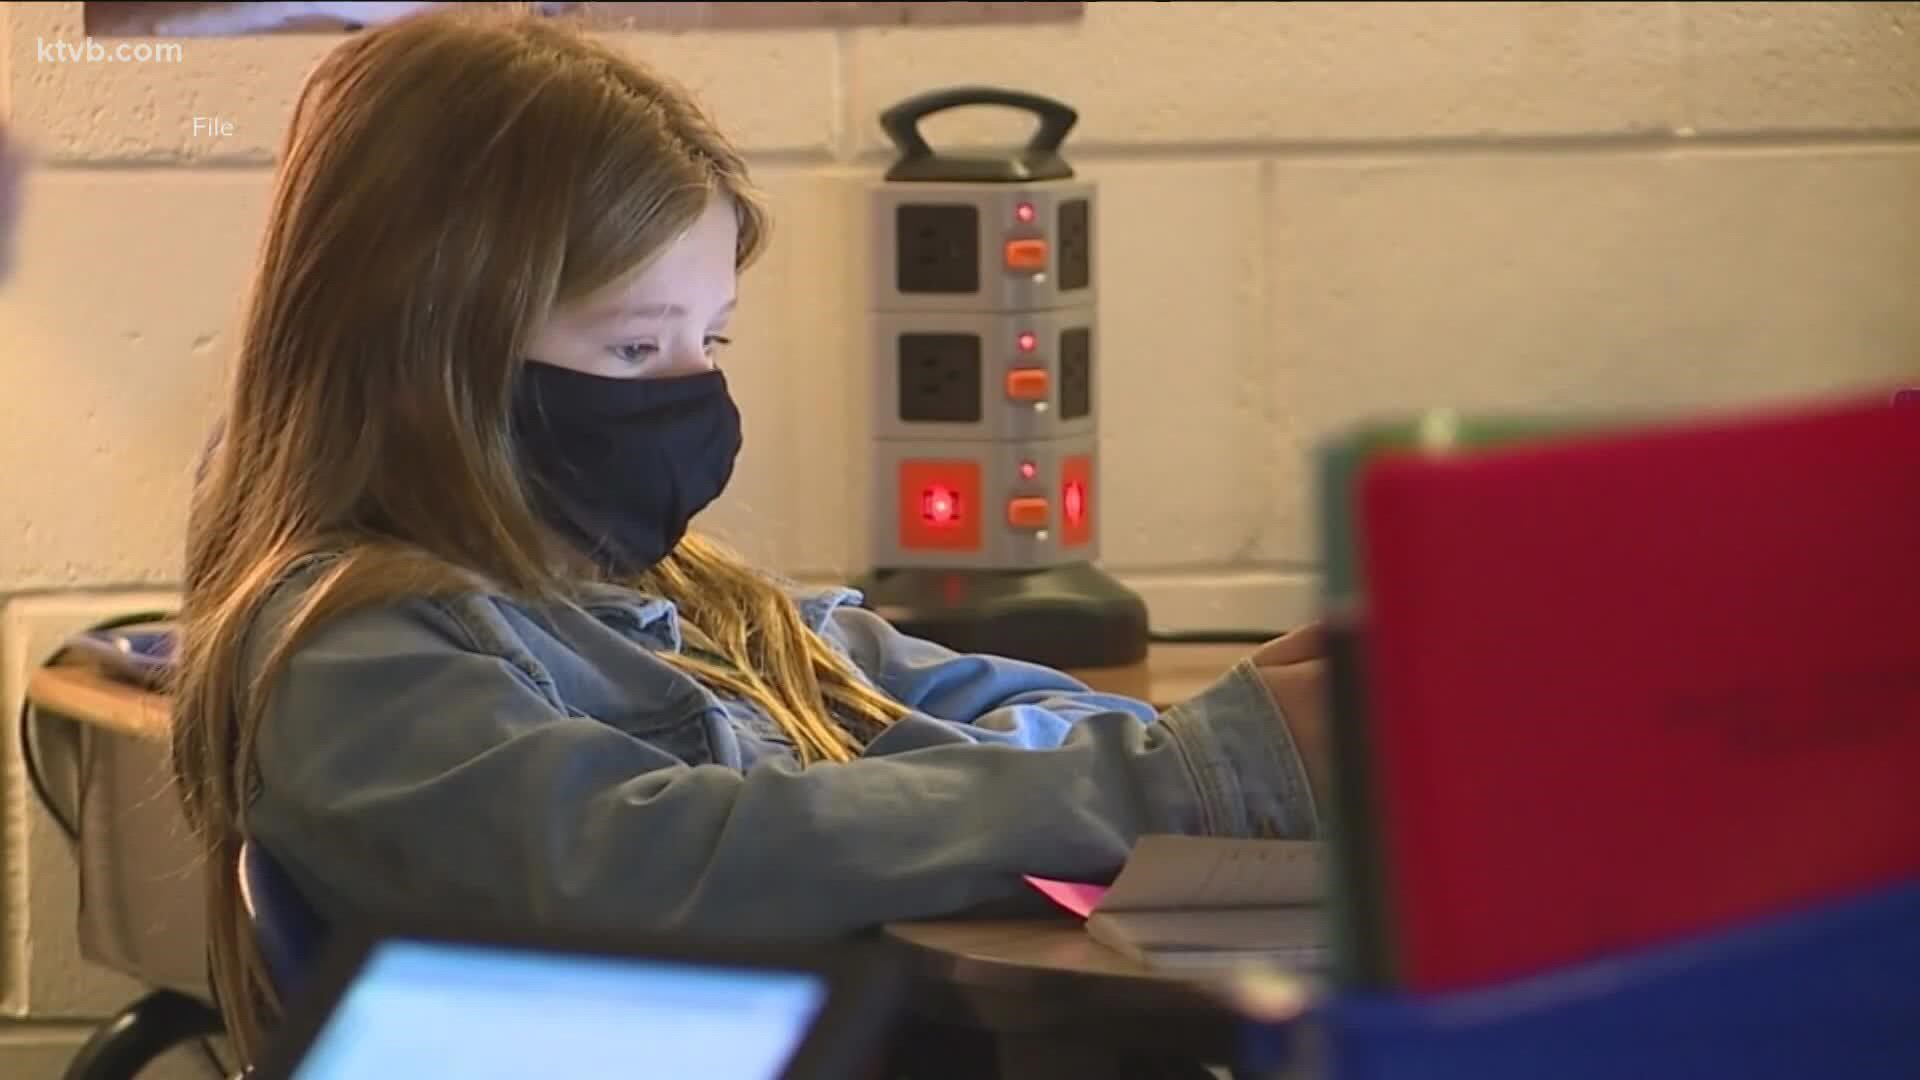 School districts across the Gem State are struggling to continue in-person learning. It's led some toward remote learning and others to cancel class altogether.